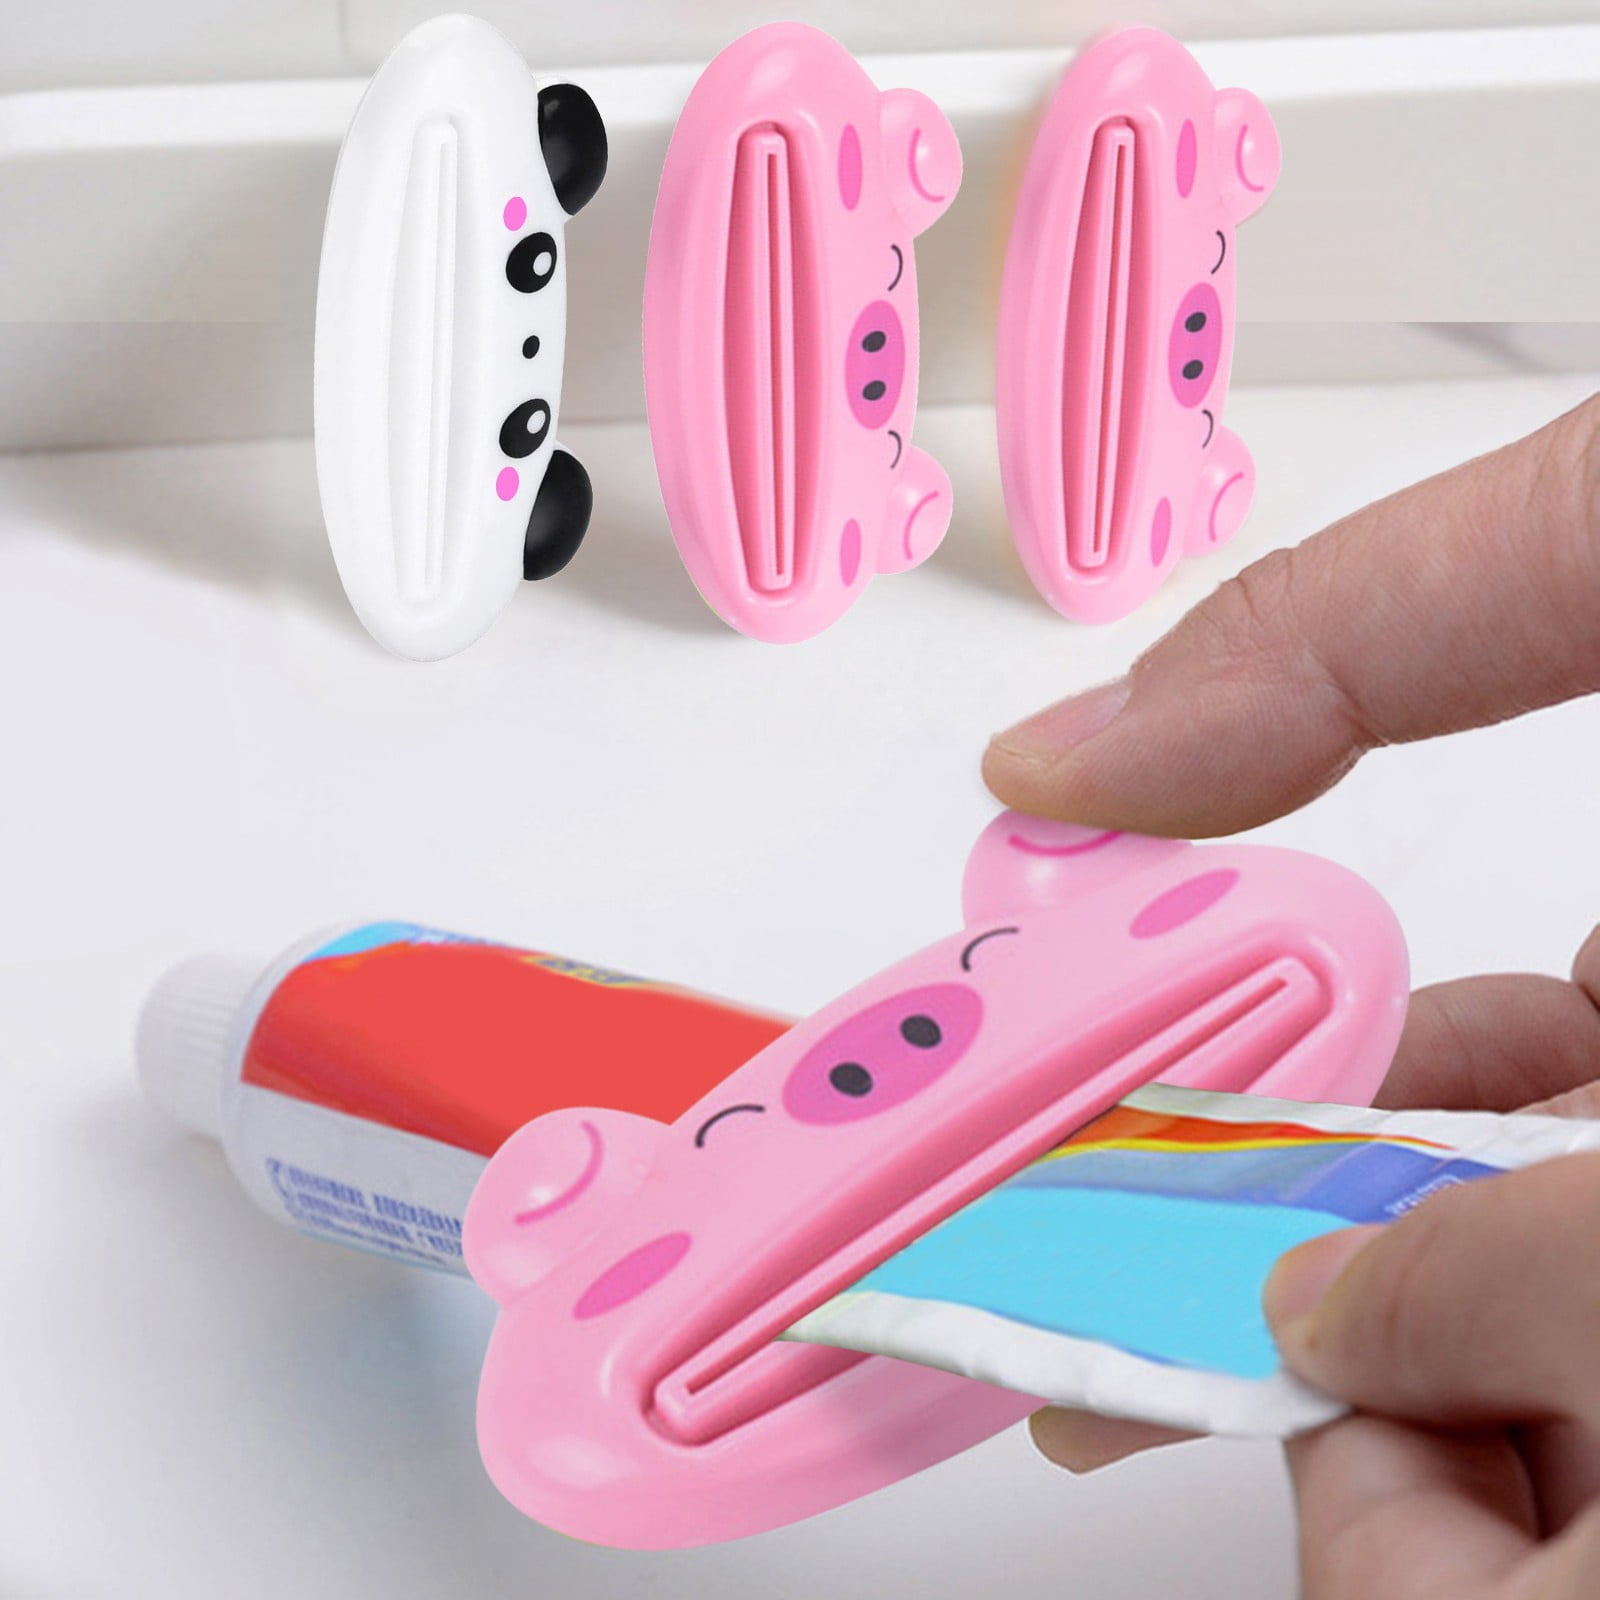 Cute Cartoon Animal Useful Easy Toothpaste Tube Squeezer Dispenser Roll Holder 